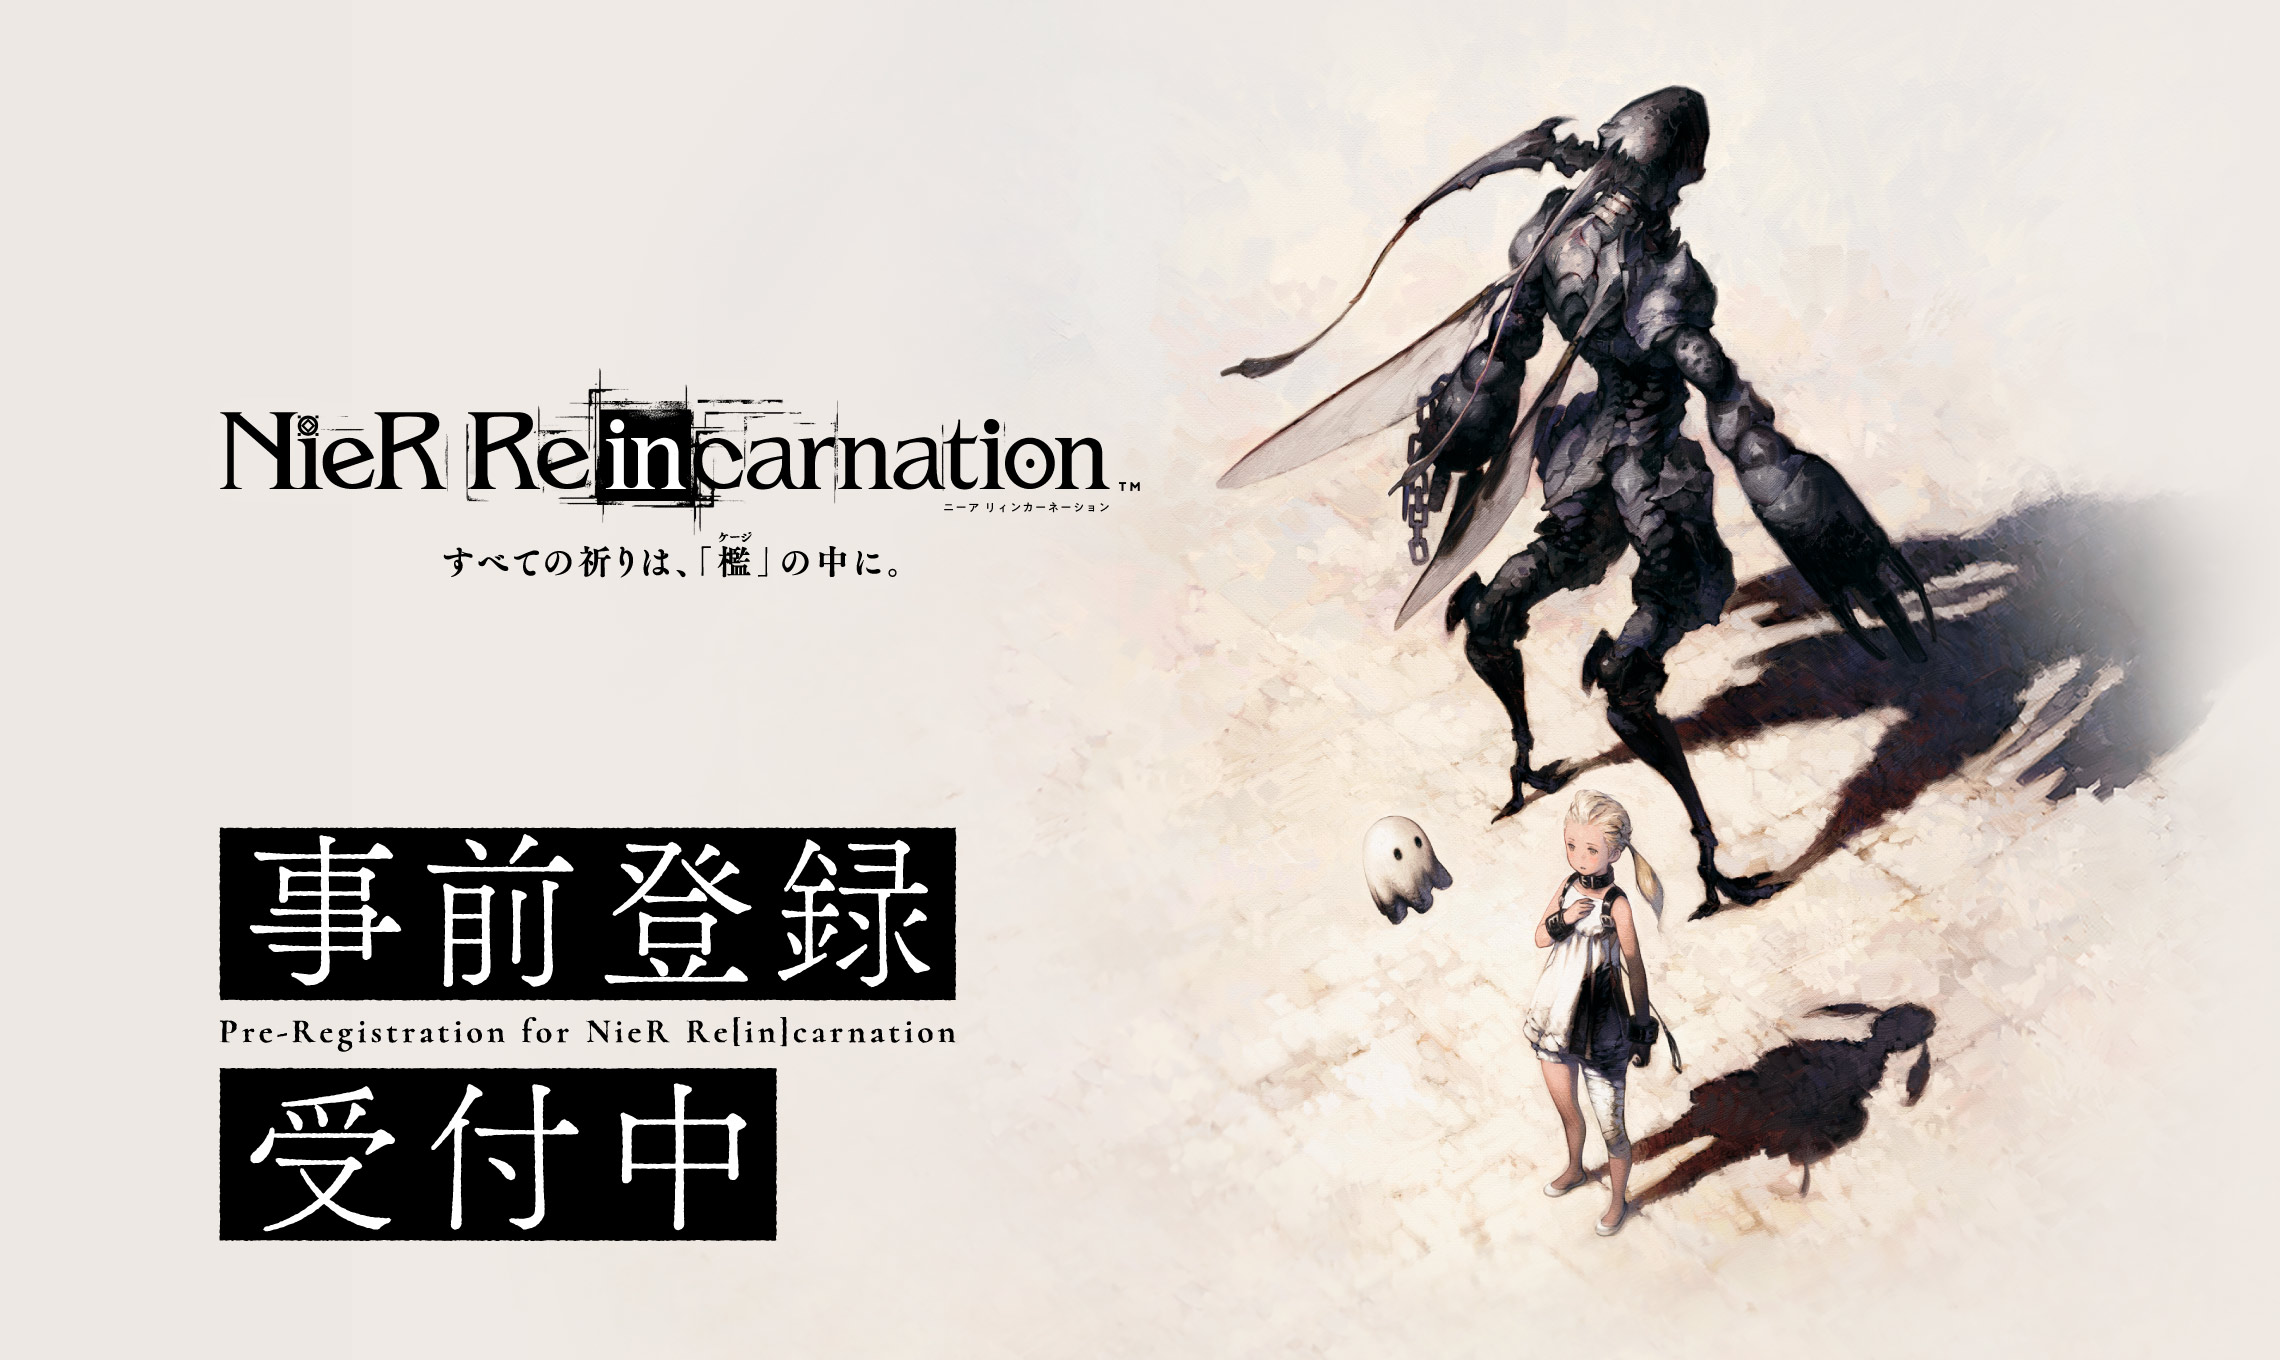 NieR’s First Ever Smartphone RPG Game Set To Be Released On Feb 18